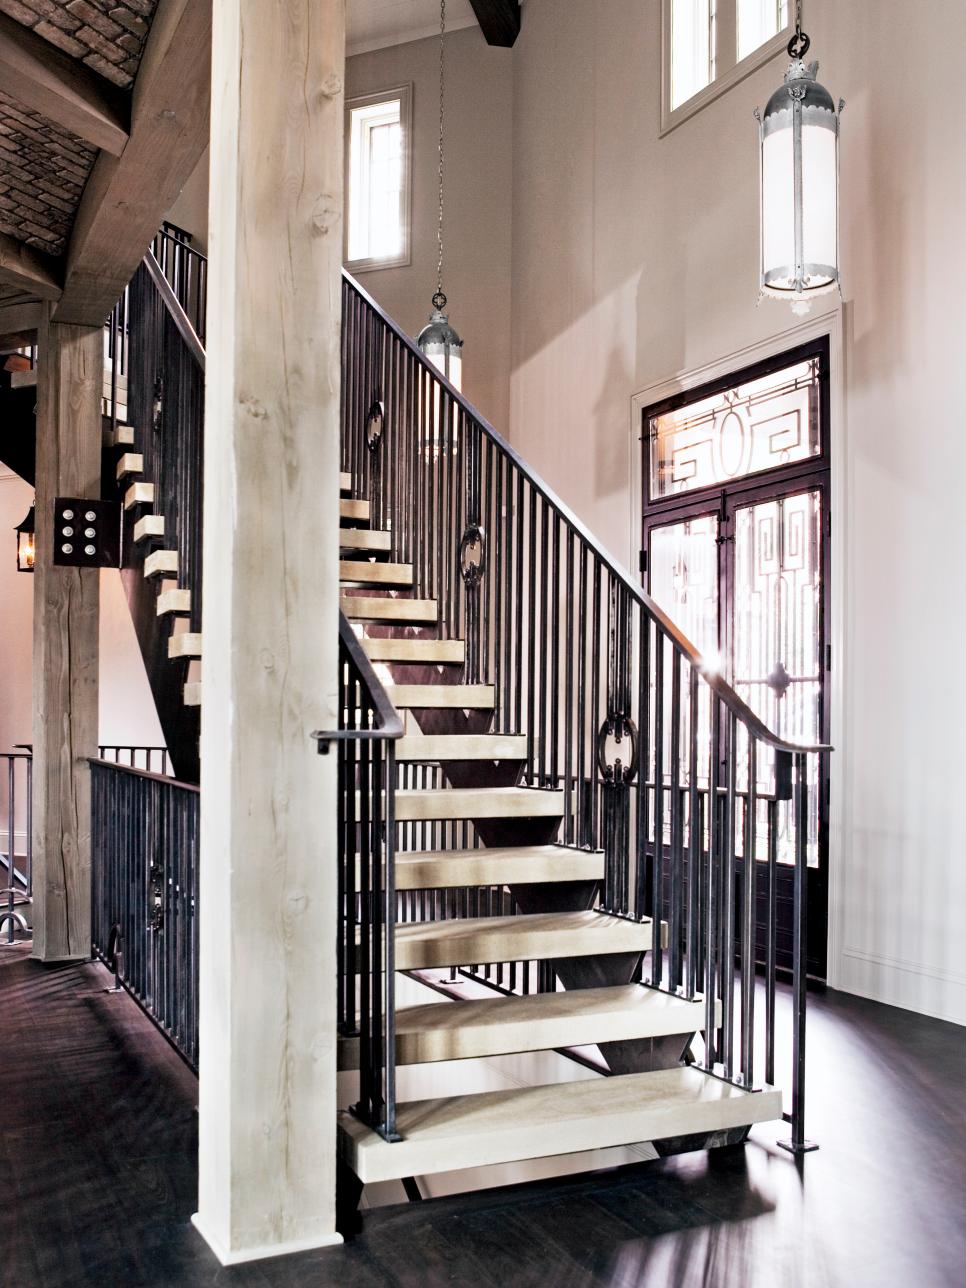 Interior Staircase with Wrought Iron Railings